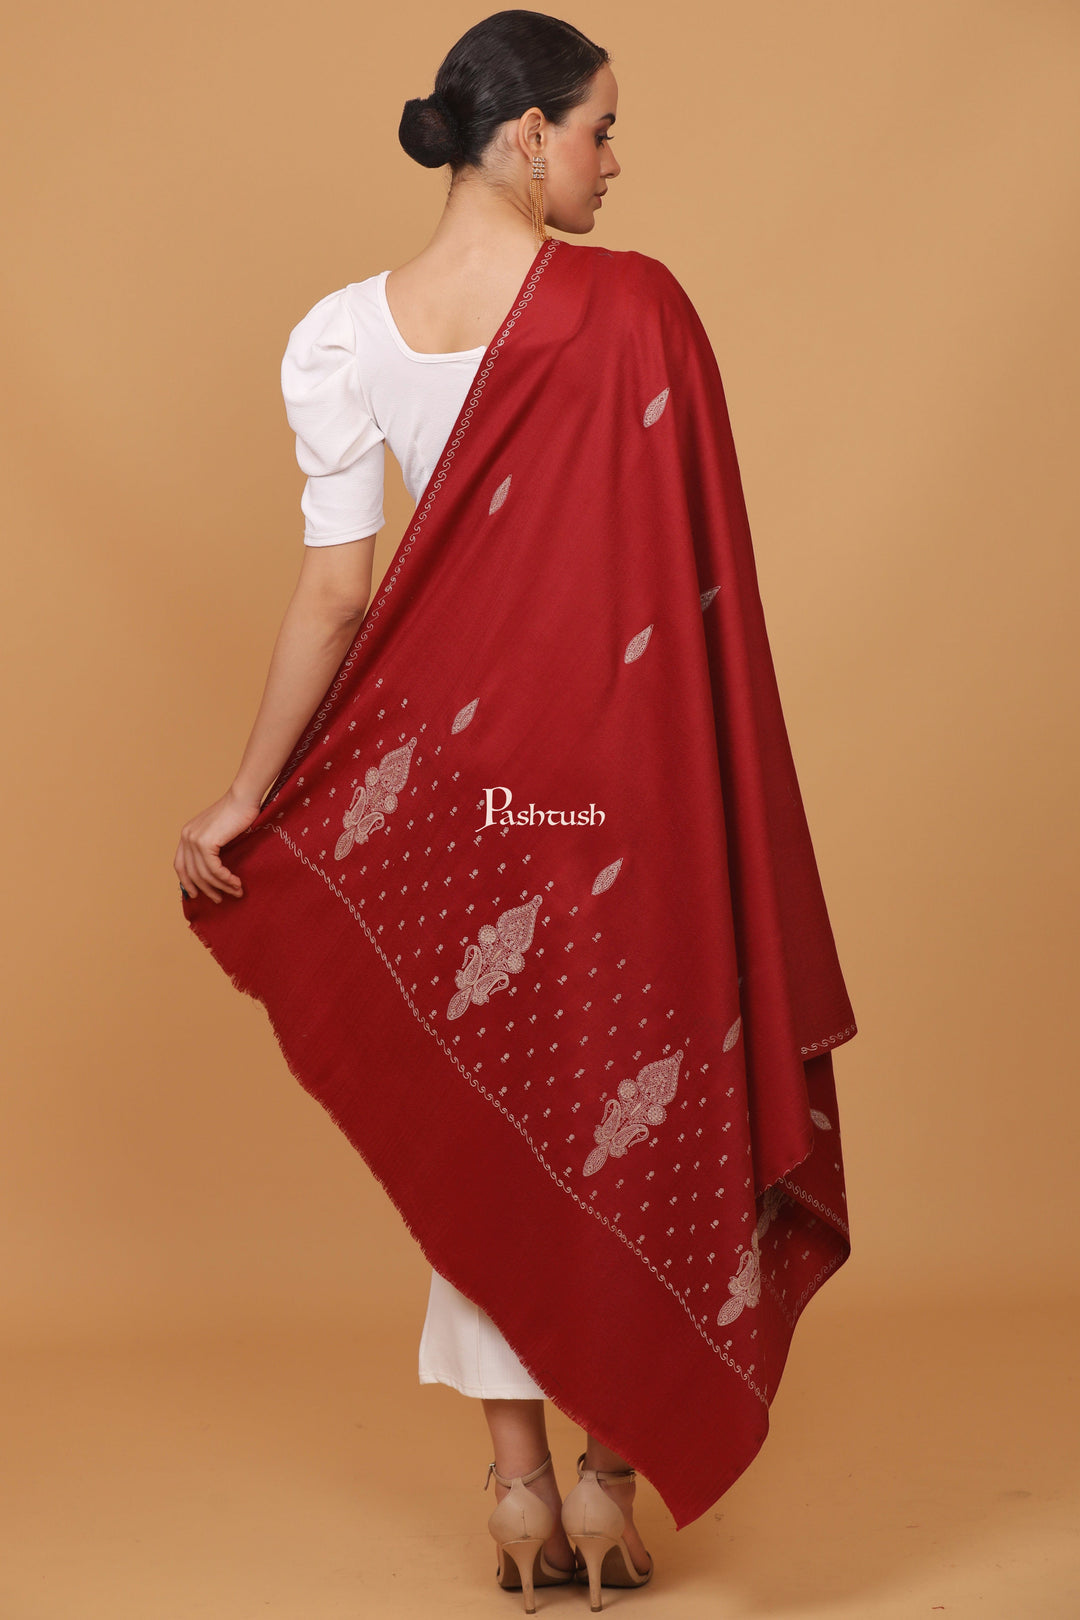 Pashtush India Gift Pack Pashtush His And Her Set Of Fine Wool Checkered Stole and Embroidery Shawl With Premium Gift Box Packaging, Red and Maroon